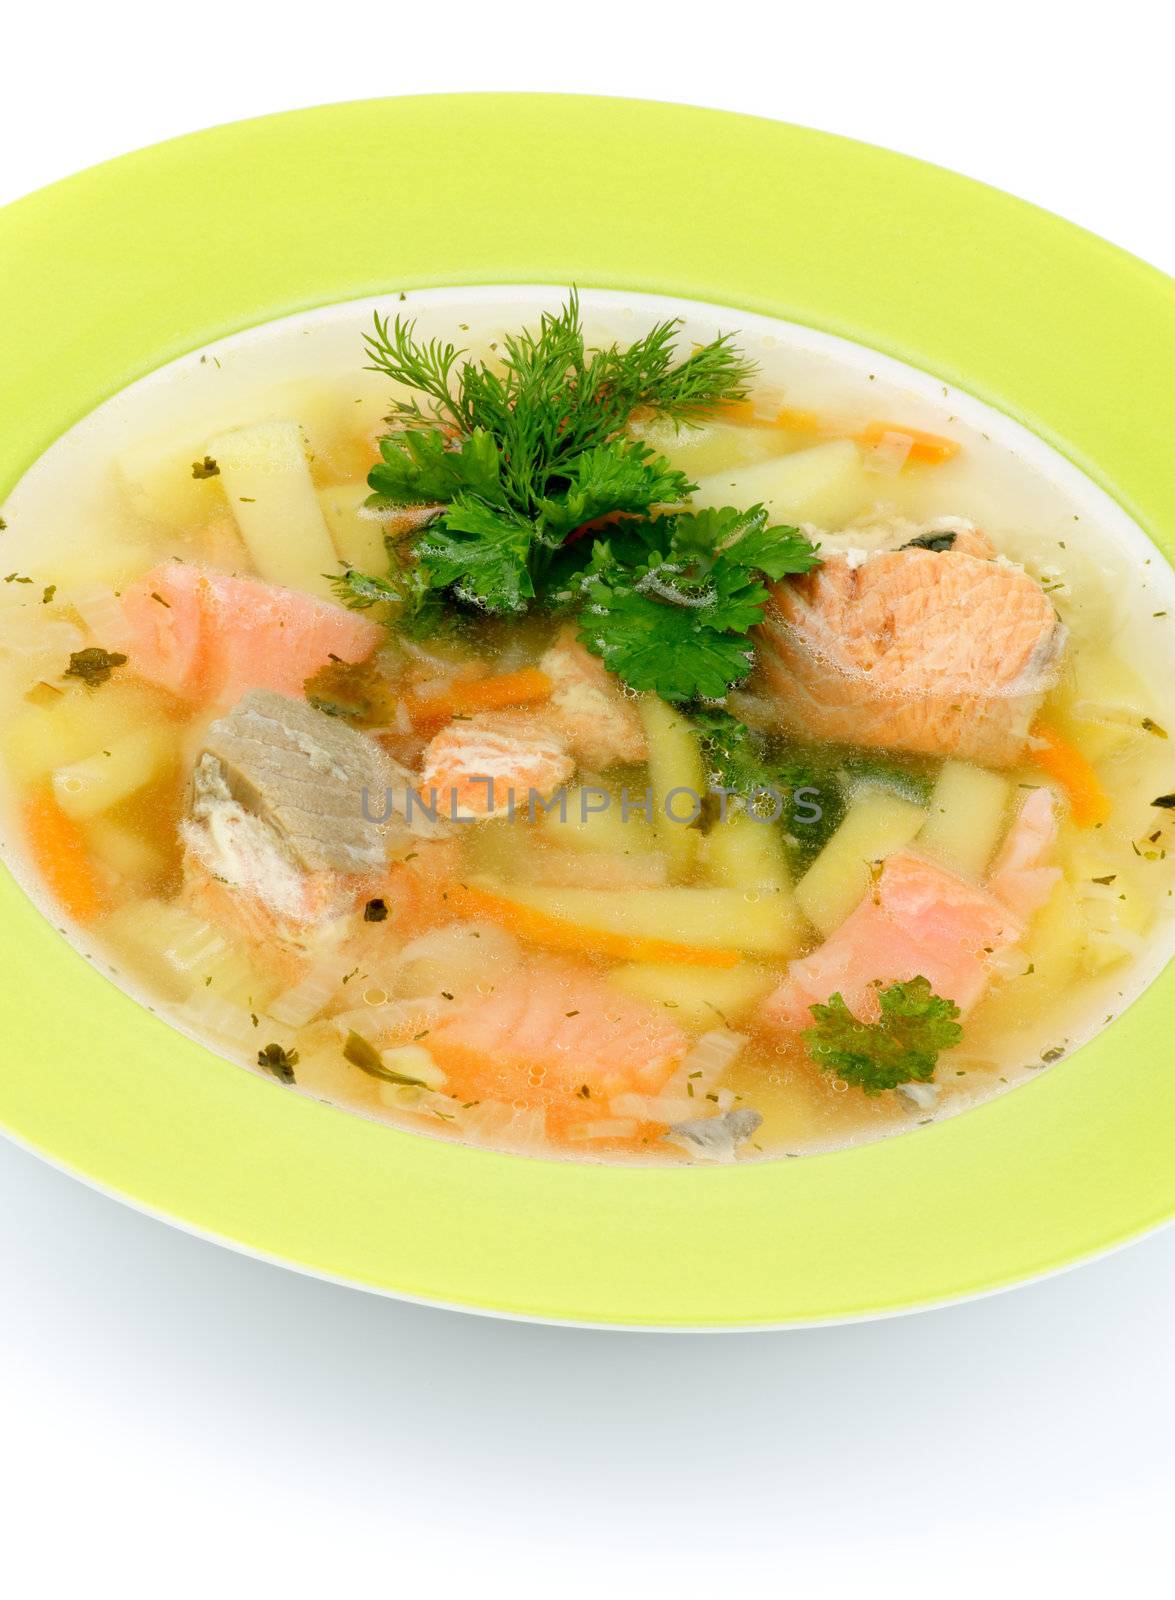 Green Plate of Fish Soup with Salmon, Cod, Trout, Potato, Carrot decorated with Dill and Parsley closeup on white background